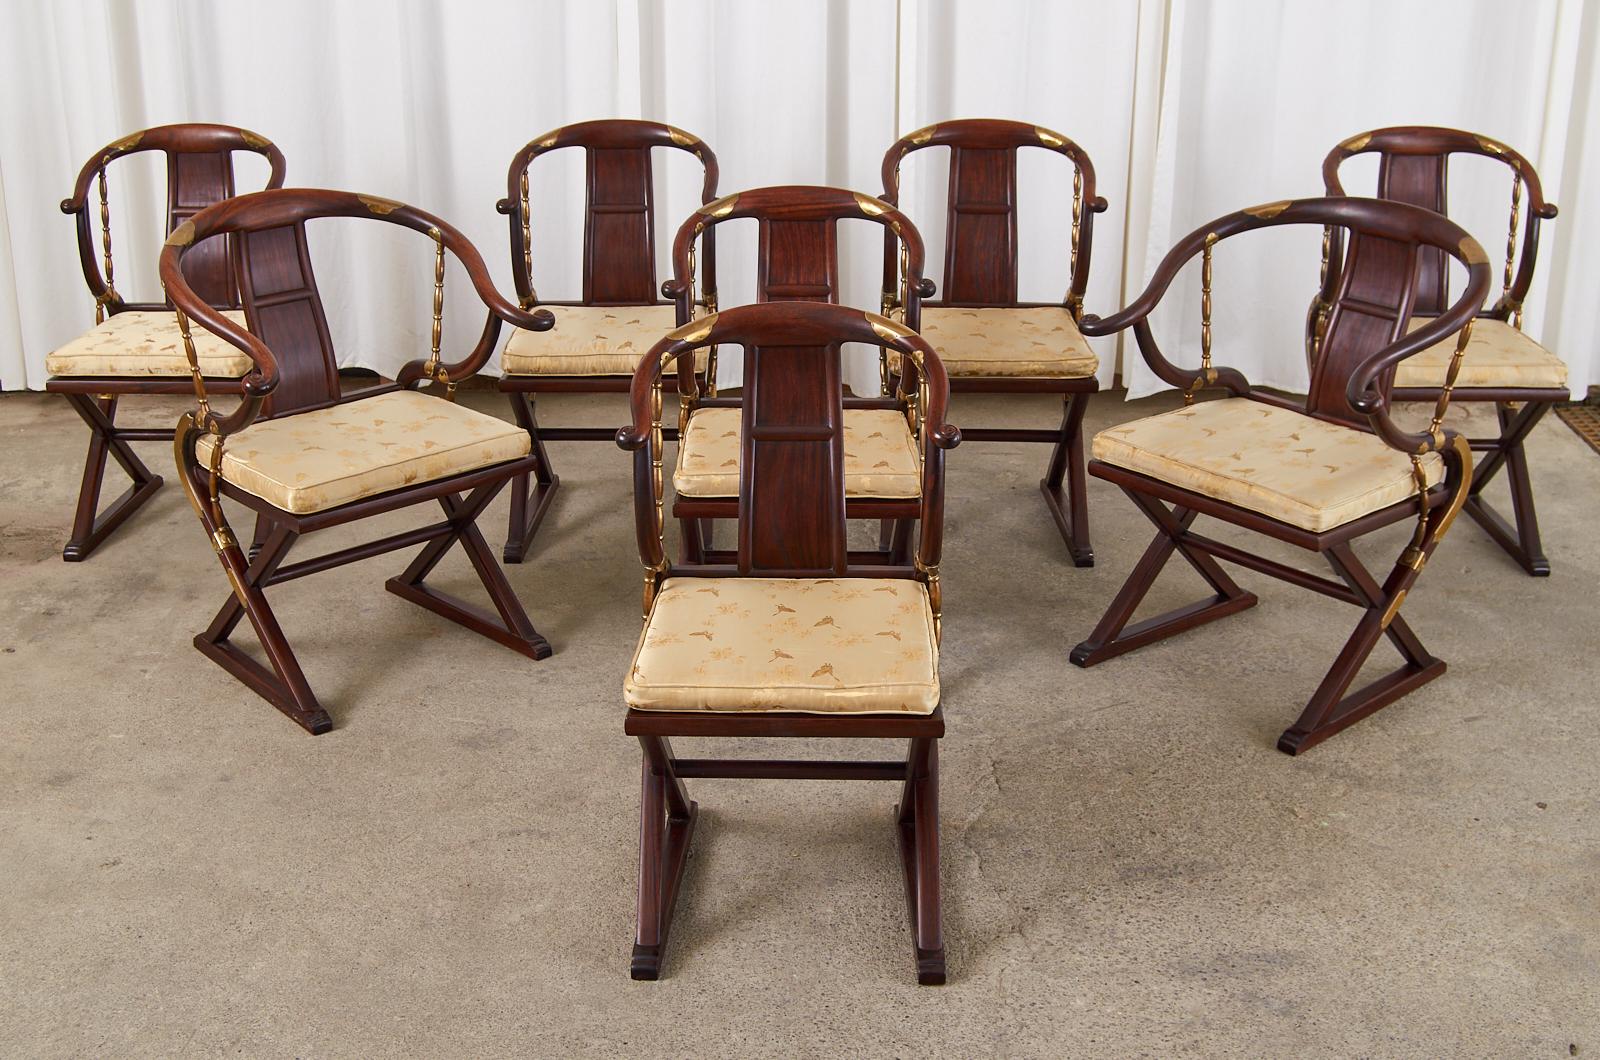 Dramatic set of eight carved hardwood Chinese export dining armchairs made in the Ming dynasty style. The chairs feature a hand-carved hardwood frame with a horseshoe shaped chair rail ending with scrolls. The arm supports gracefully curve down to a